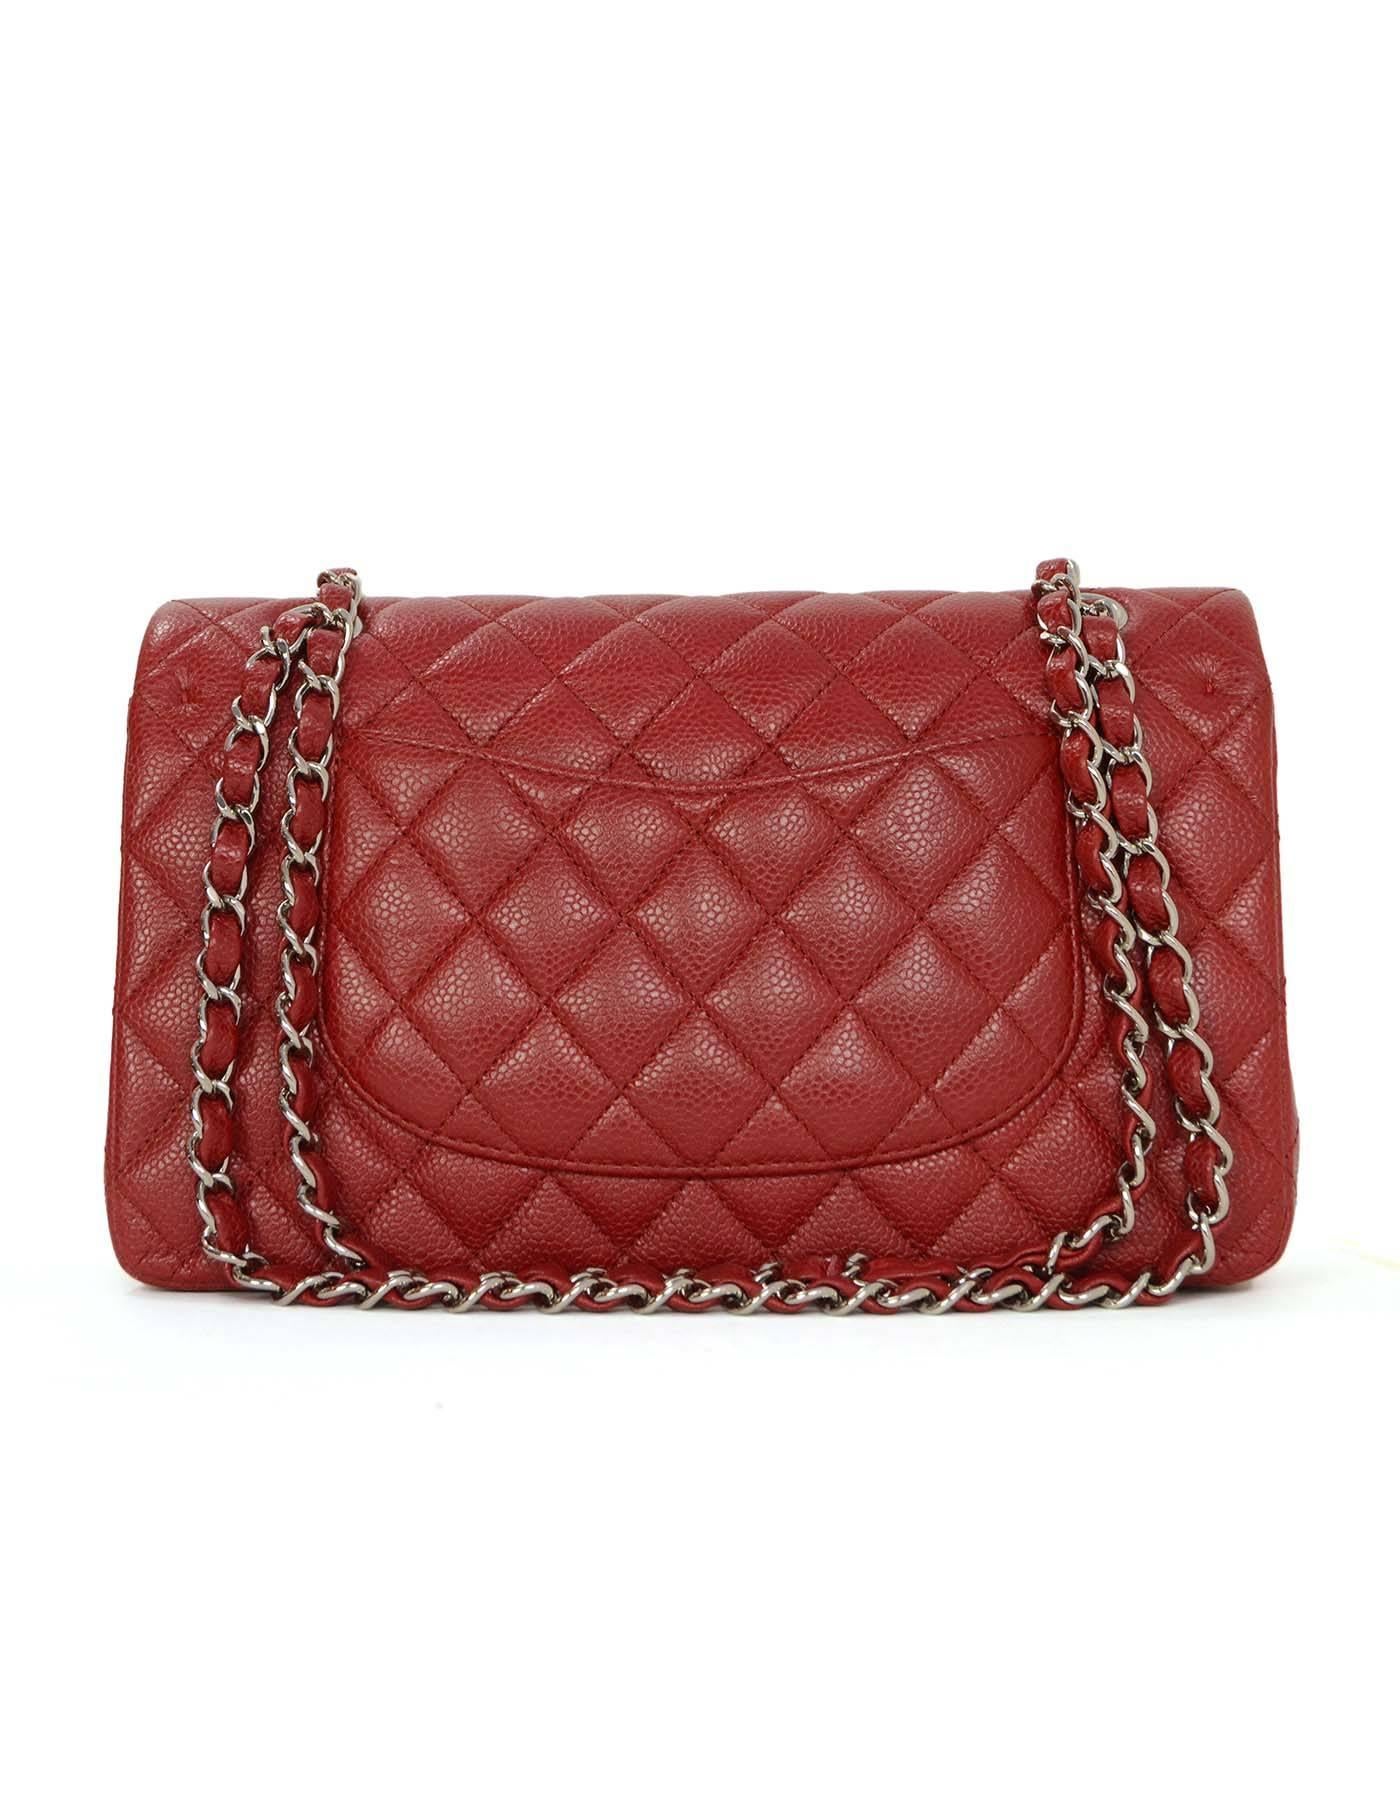 Chanel Red Caviar Medium Double Flap Bag
Features adjustable shoulder strap
Made In: France
Year of Production: 2011
Color: Red
Hardware: Silvertone
Materials: Caviar leather
Lining: Red leather
Closure/Opening: Double flap top with snap and